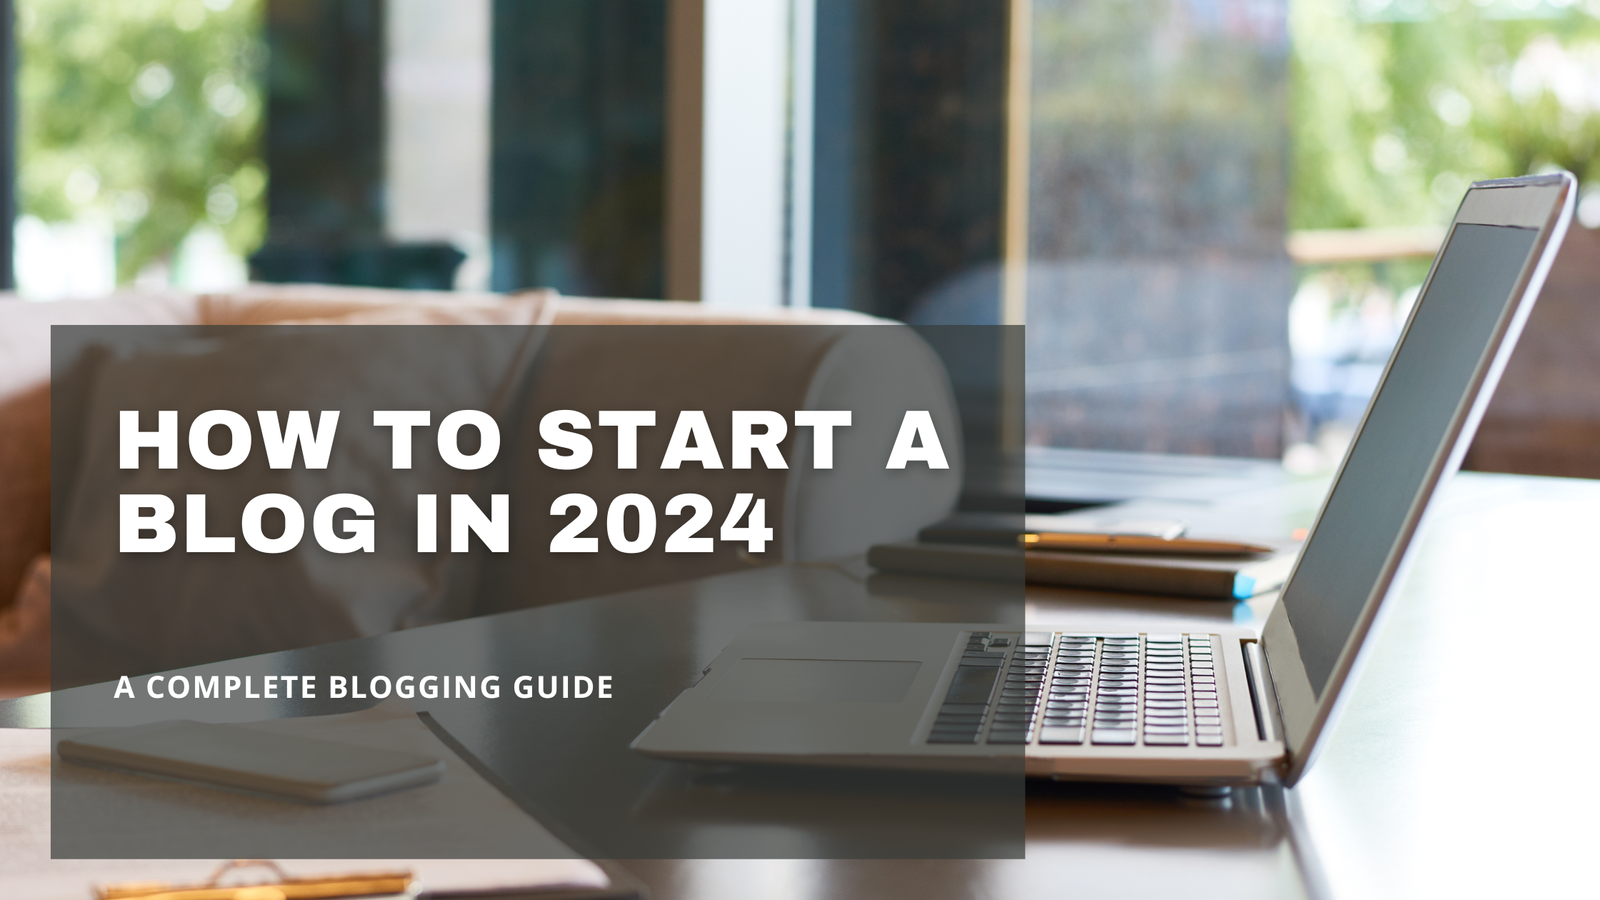 A Complete Blogging Guide – Start A Blog In 2024